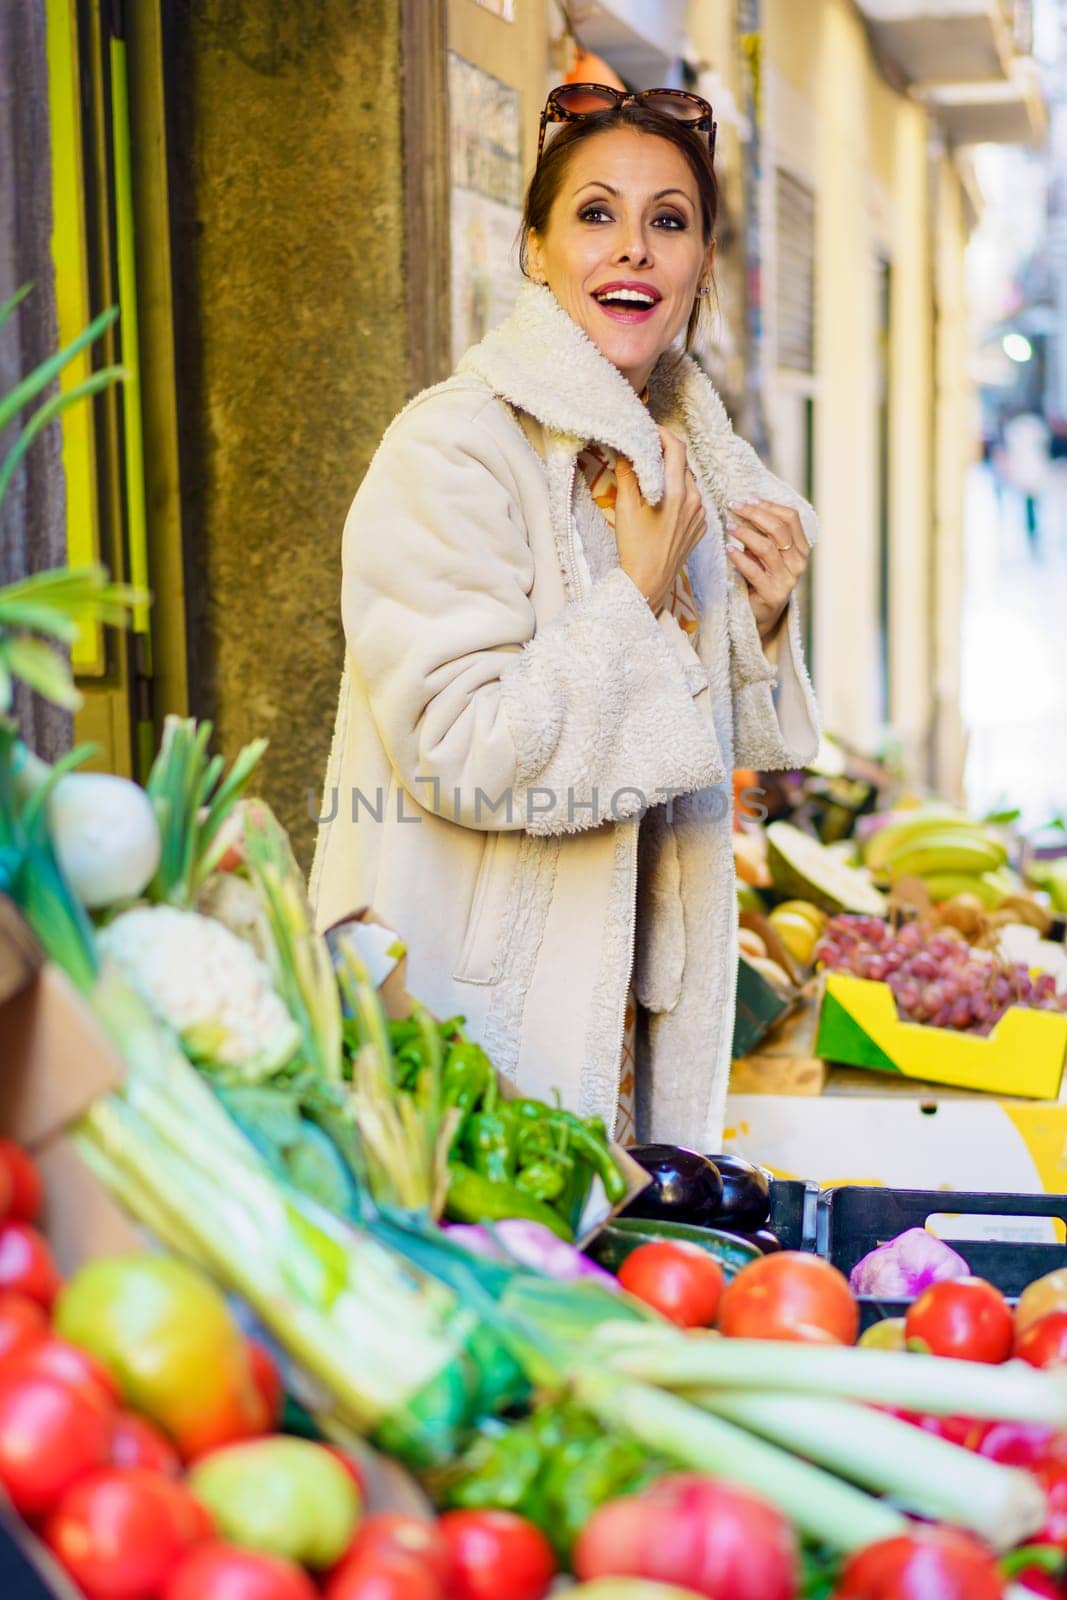 Smiling woman in warm coat standing by stall of fruits and vegetables by javiindy